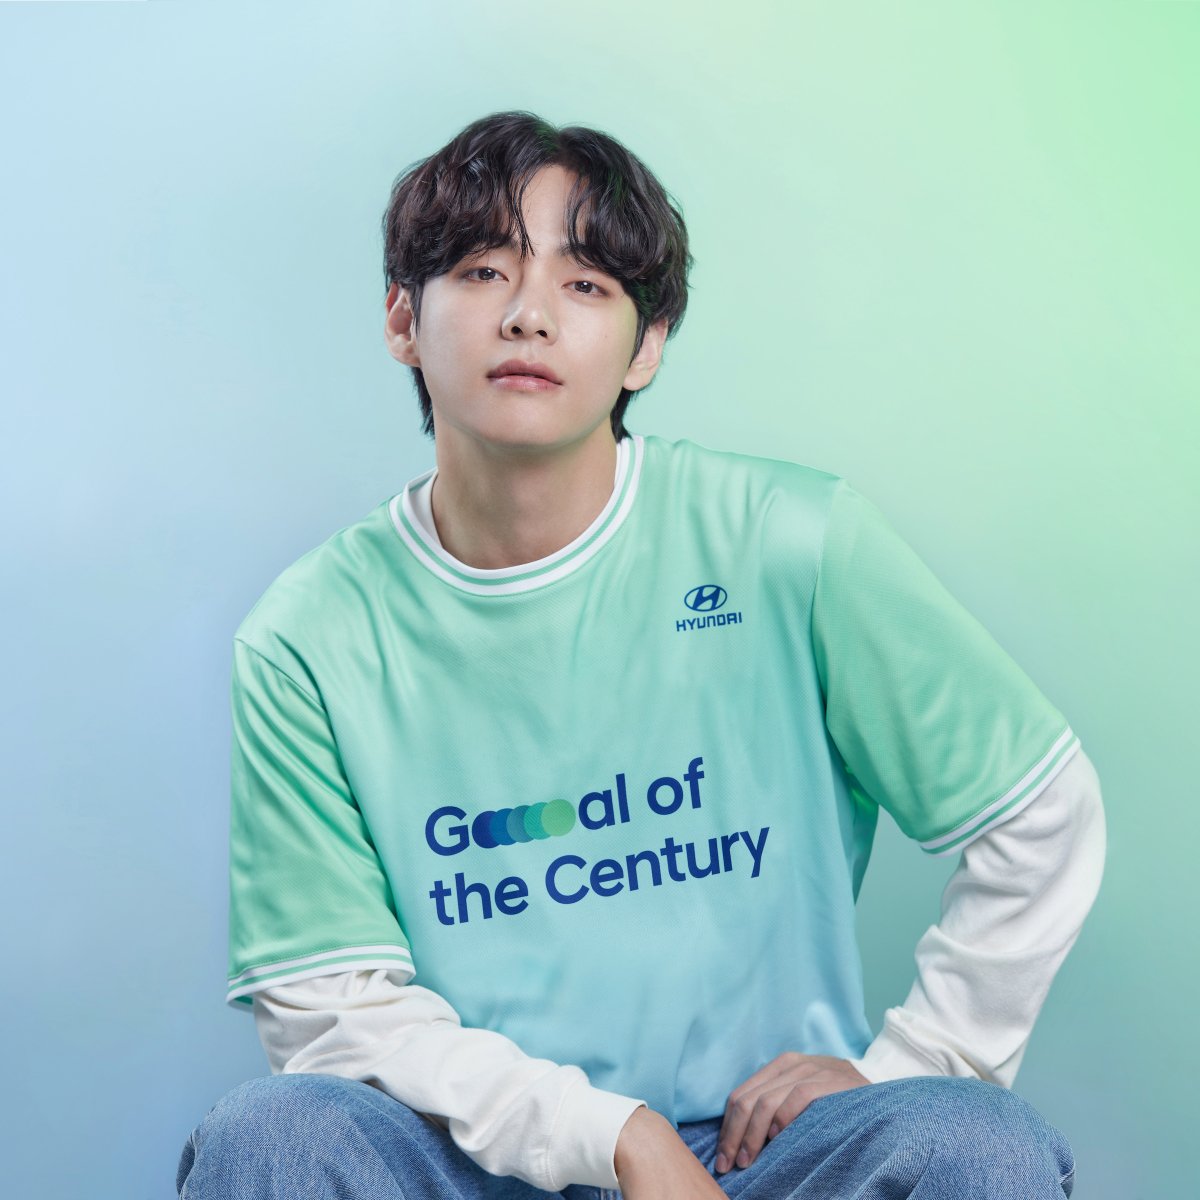 “I am excited with the idea of solidarity for sustainability.” V shared his expectation of #GoaloftheCentury. 

Join us, subscribe to our newsletter and get an exclusive BTS photo in your mail!: bit.ly/3LJxUUv

#Hyundai #HyundaiFootball #HyundaixBTS @bts_bighit